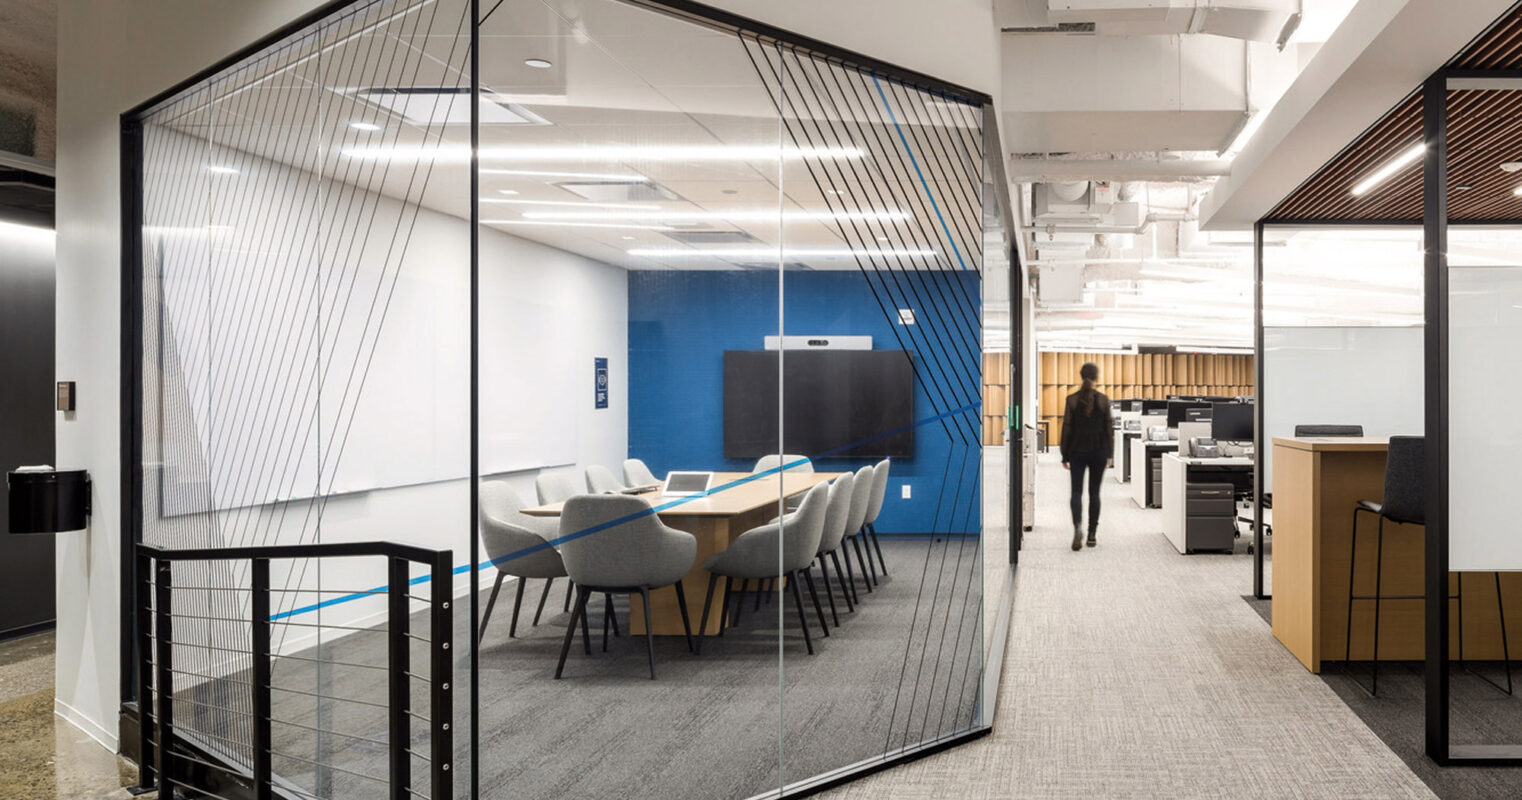 Modern office space featuring an open-plan layout with sleek glass partition walls. The meeting area includes a minimalist design with blue accent wall, complemented by grey carpeting and white ceiling exposing ductwork, revealing a blend of contemporary style with industrial elements.